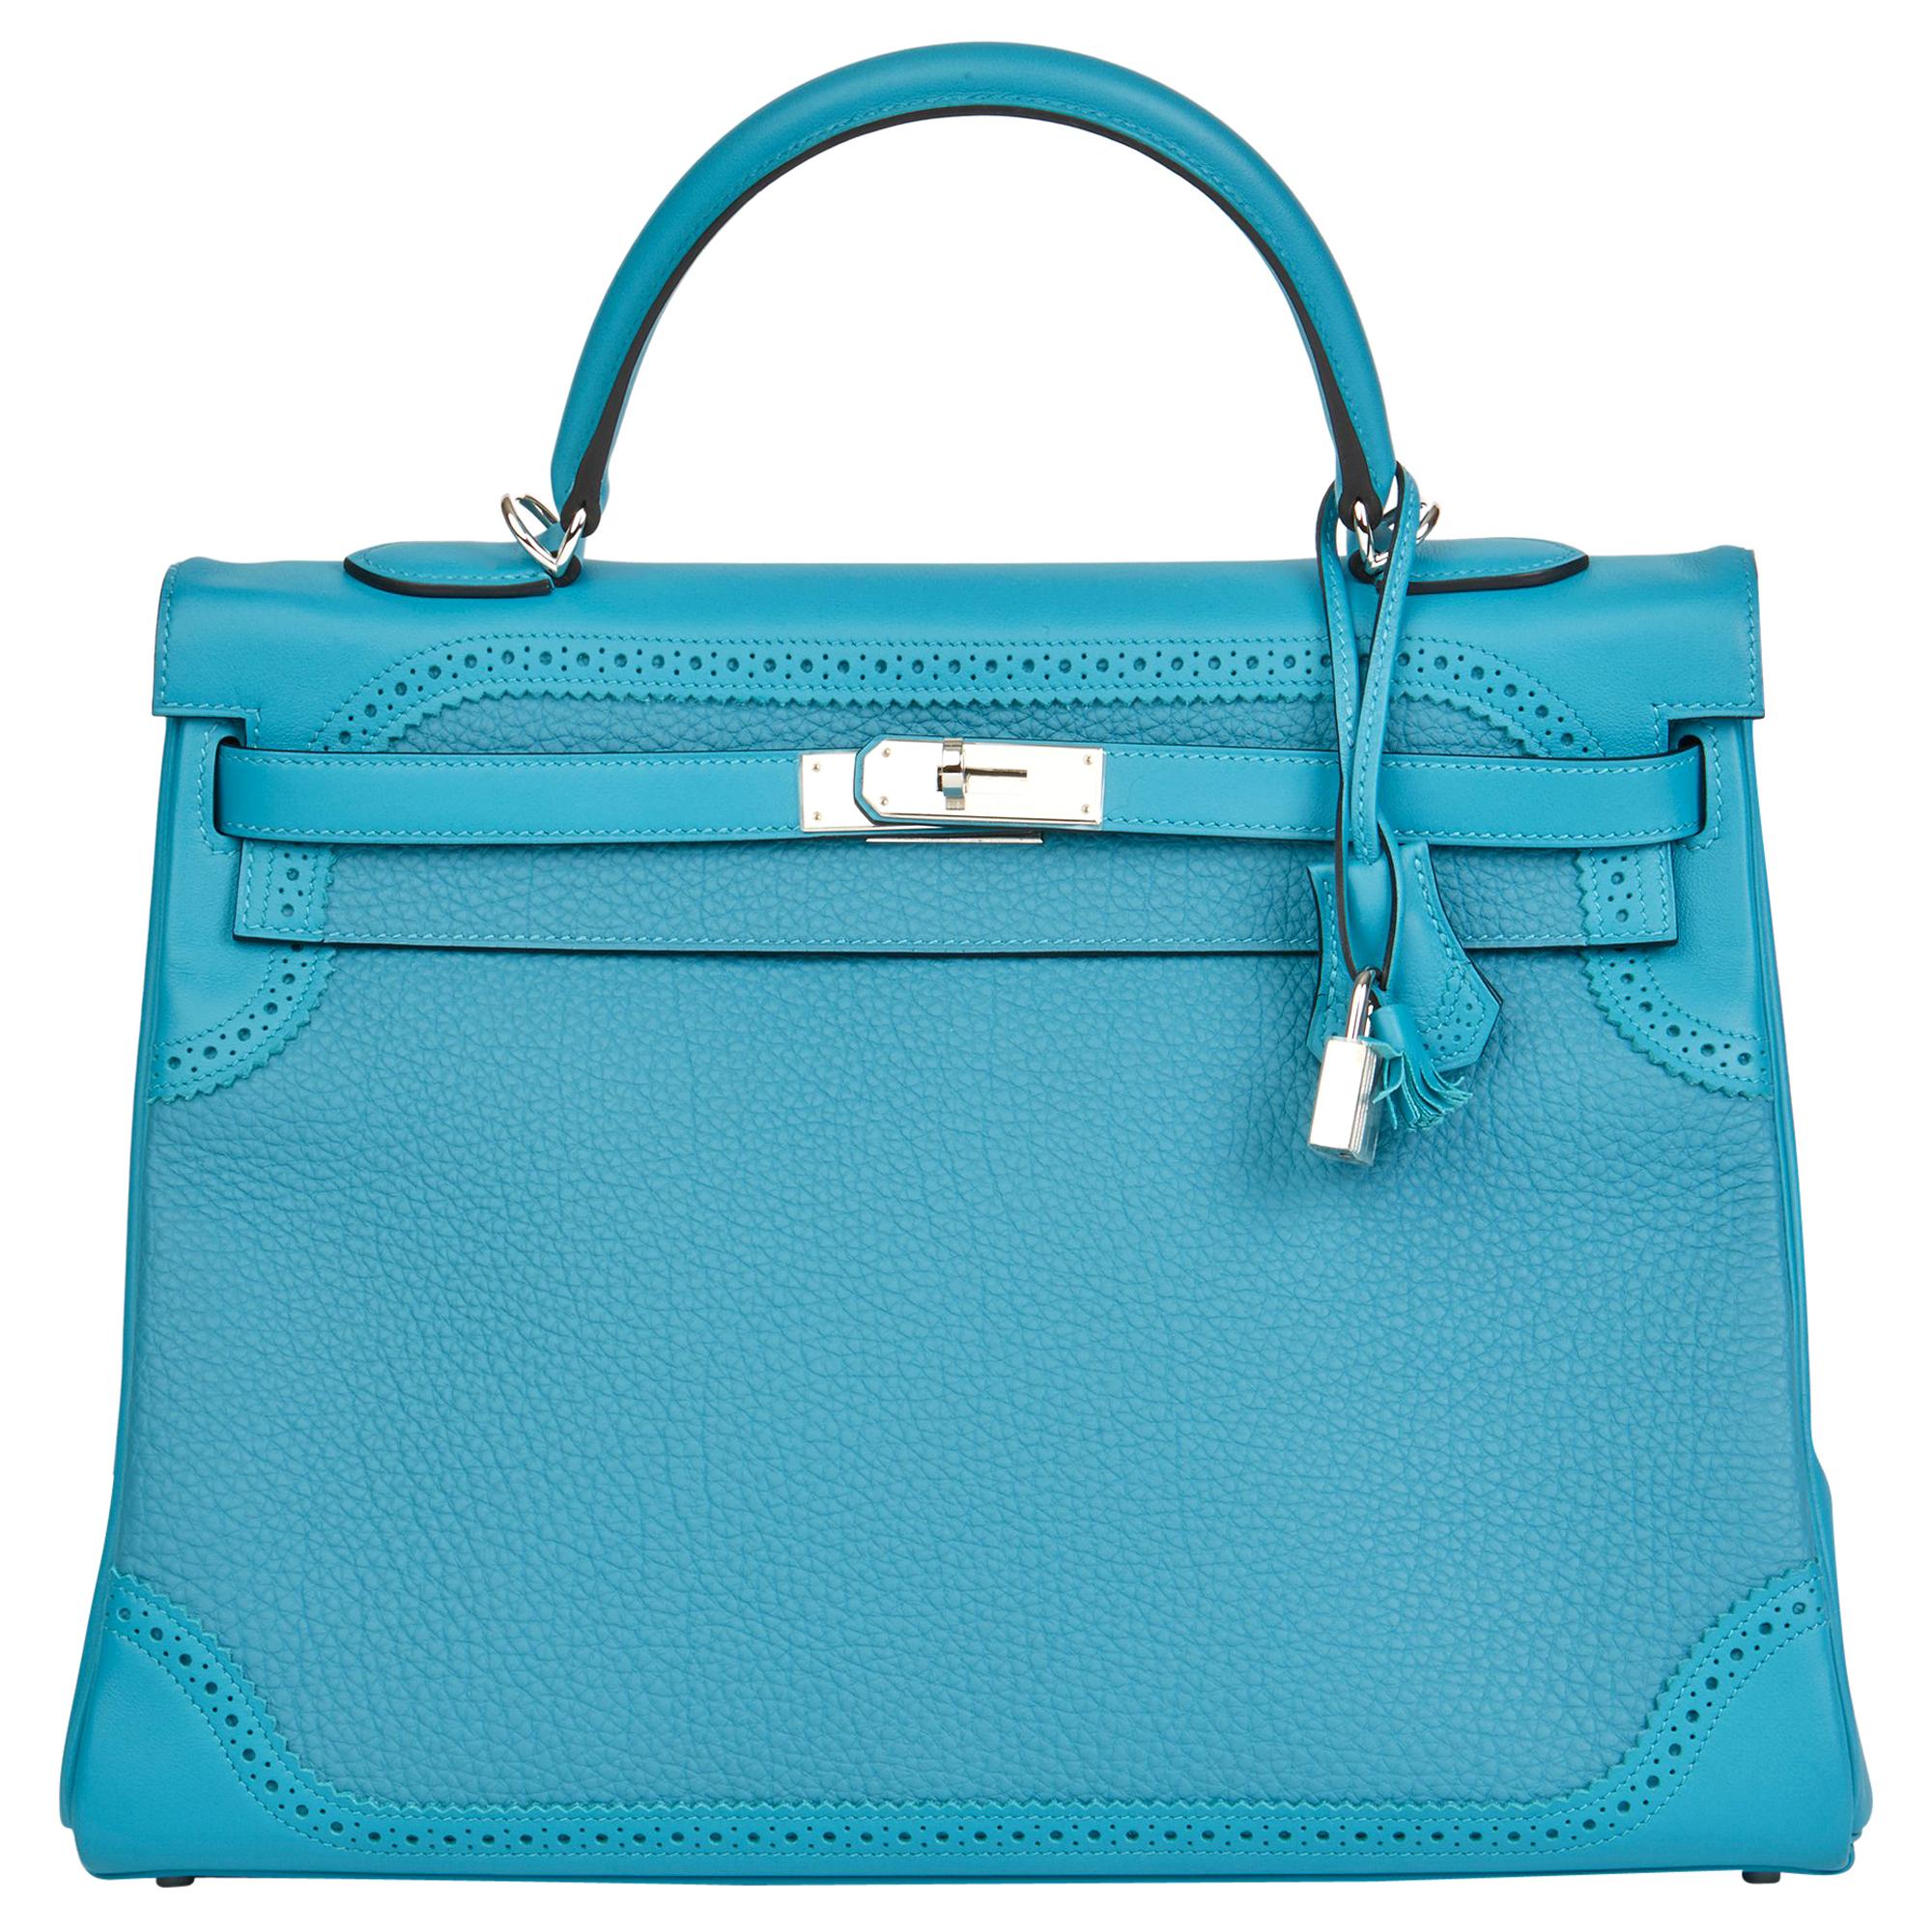 2014 Hermes Turquoise Togo & Swift Leather Ghillies Kelly 35cm Retourne